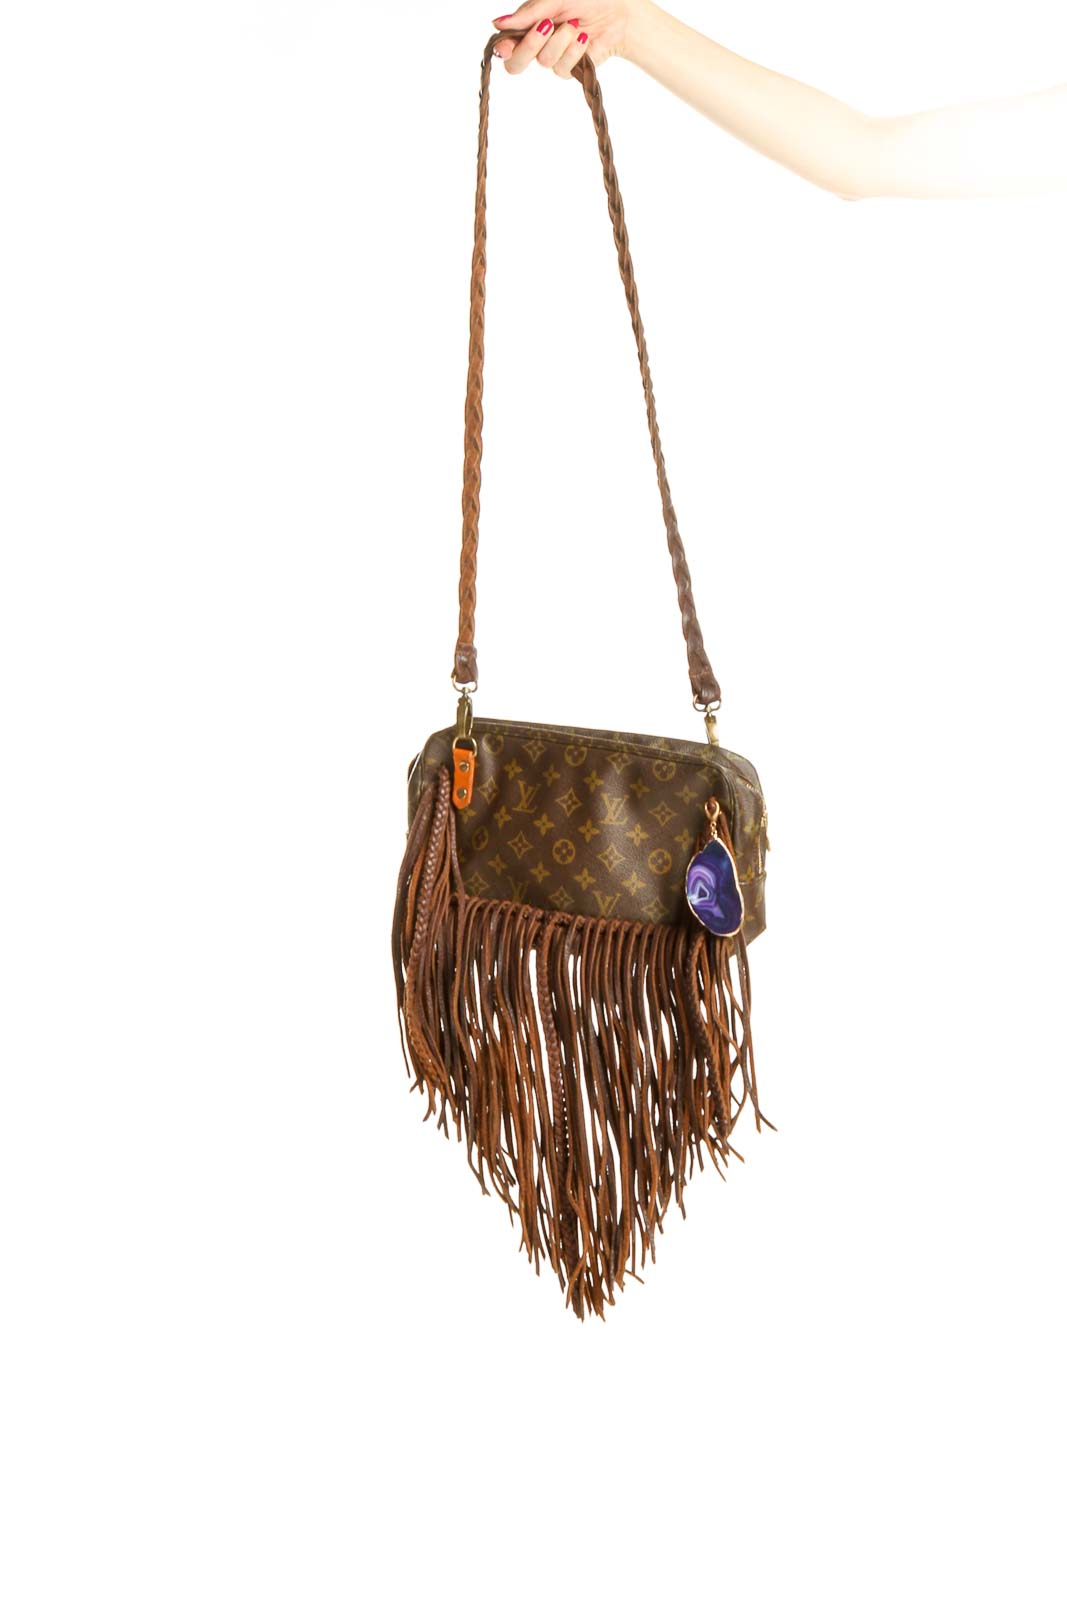 Authentic Louis Vuitton Reworked Fringe Crossbody Bag With 